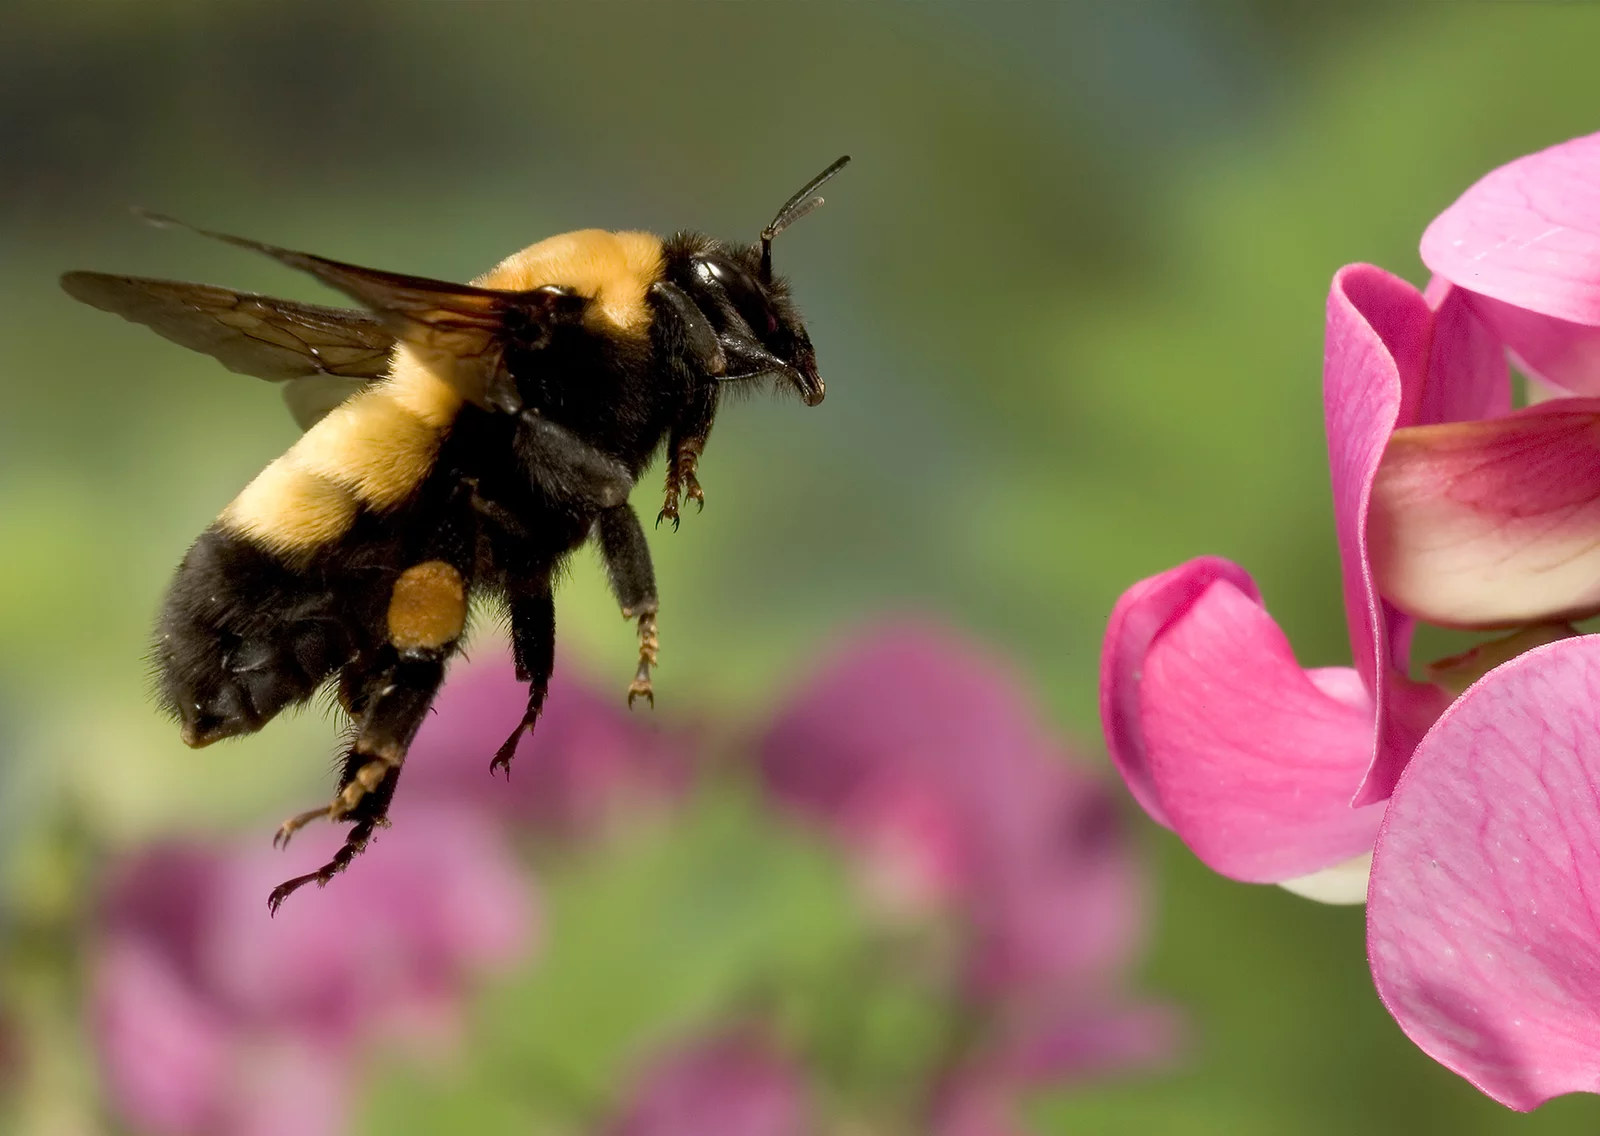 A bumblebee in flight approaches a flower. Photo: Michael Durham / Minden Pictures / Getty Images